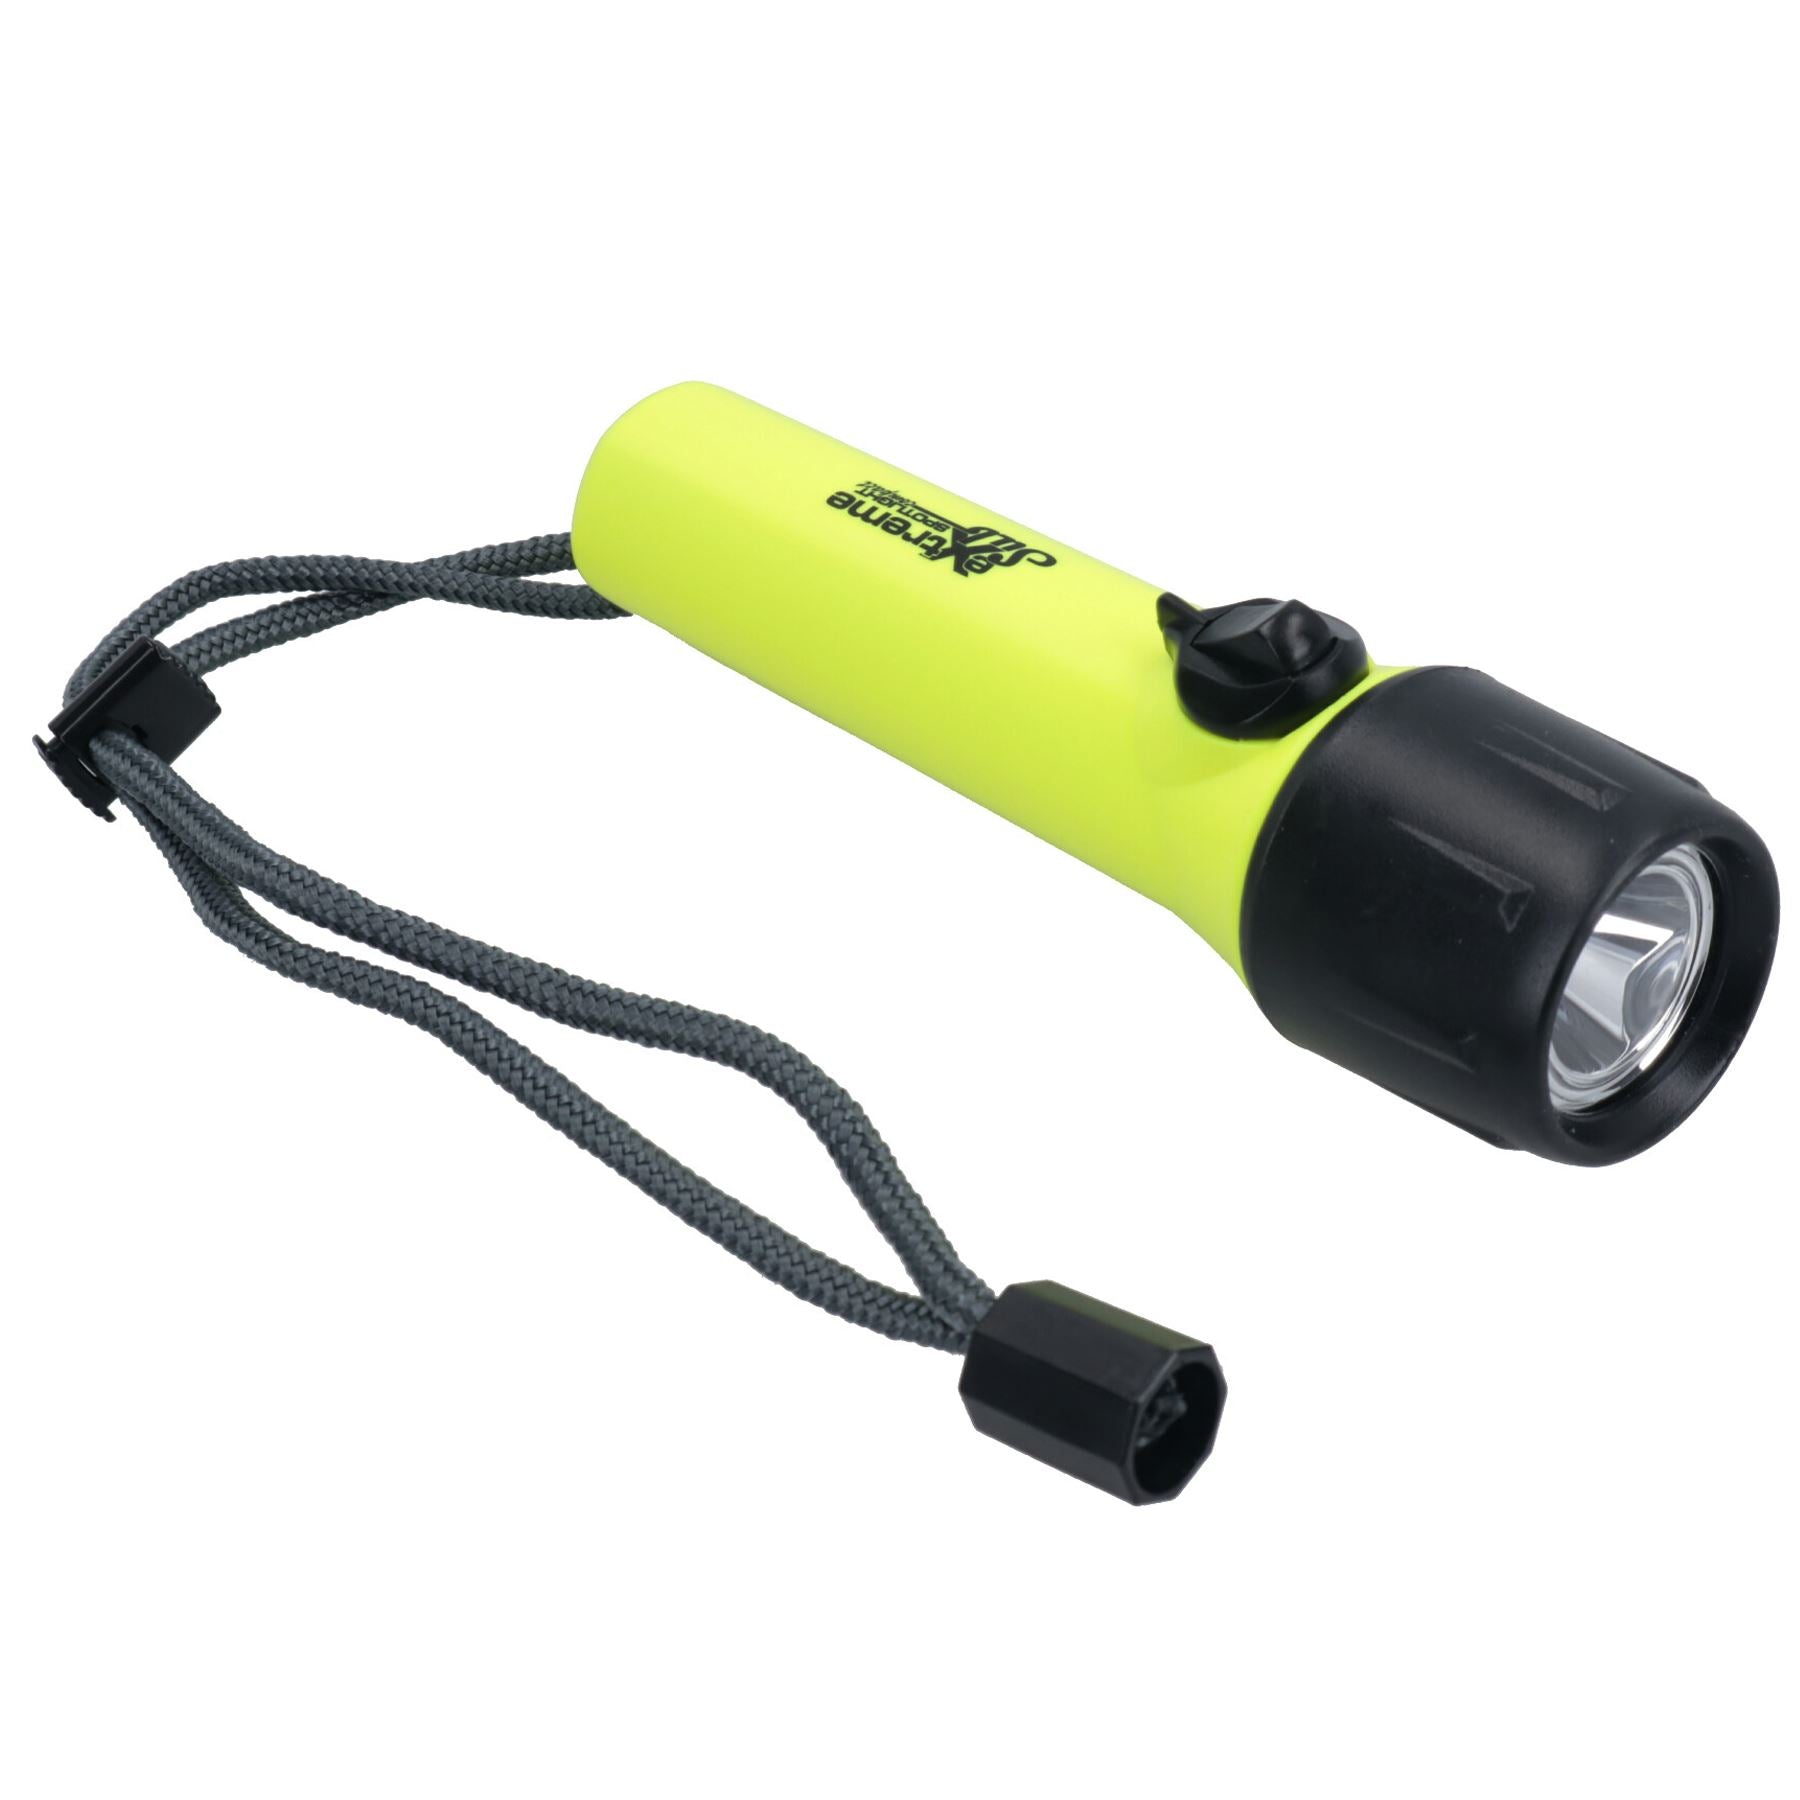 30m Rated Marine Diving Torch Osculati Extreme Sub Waterproof LED Flashlight